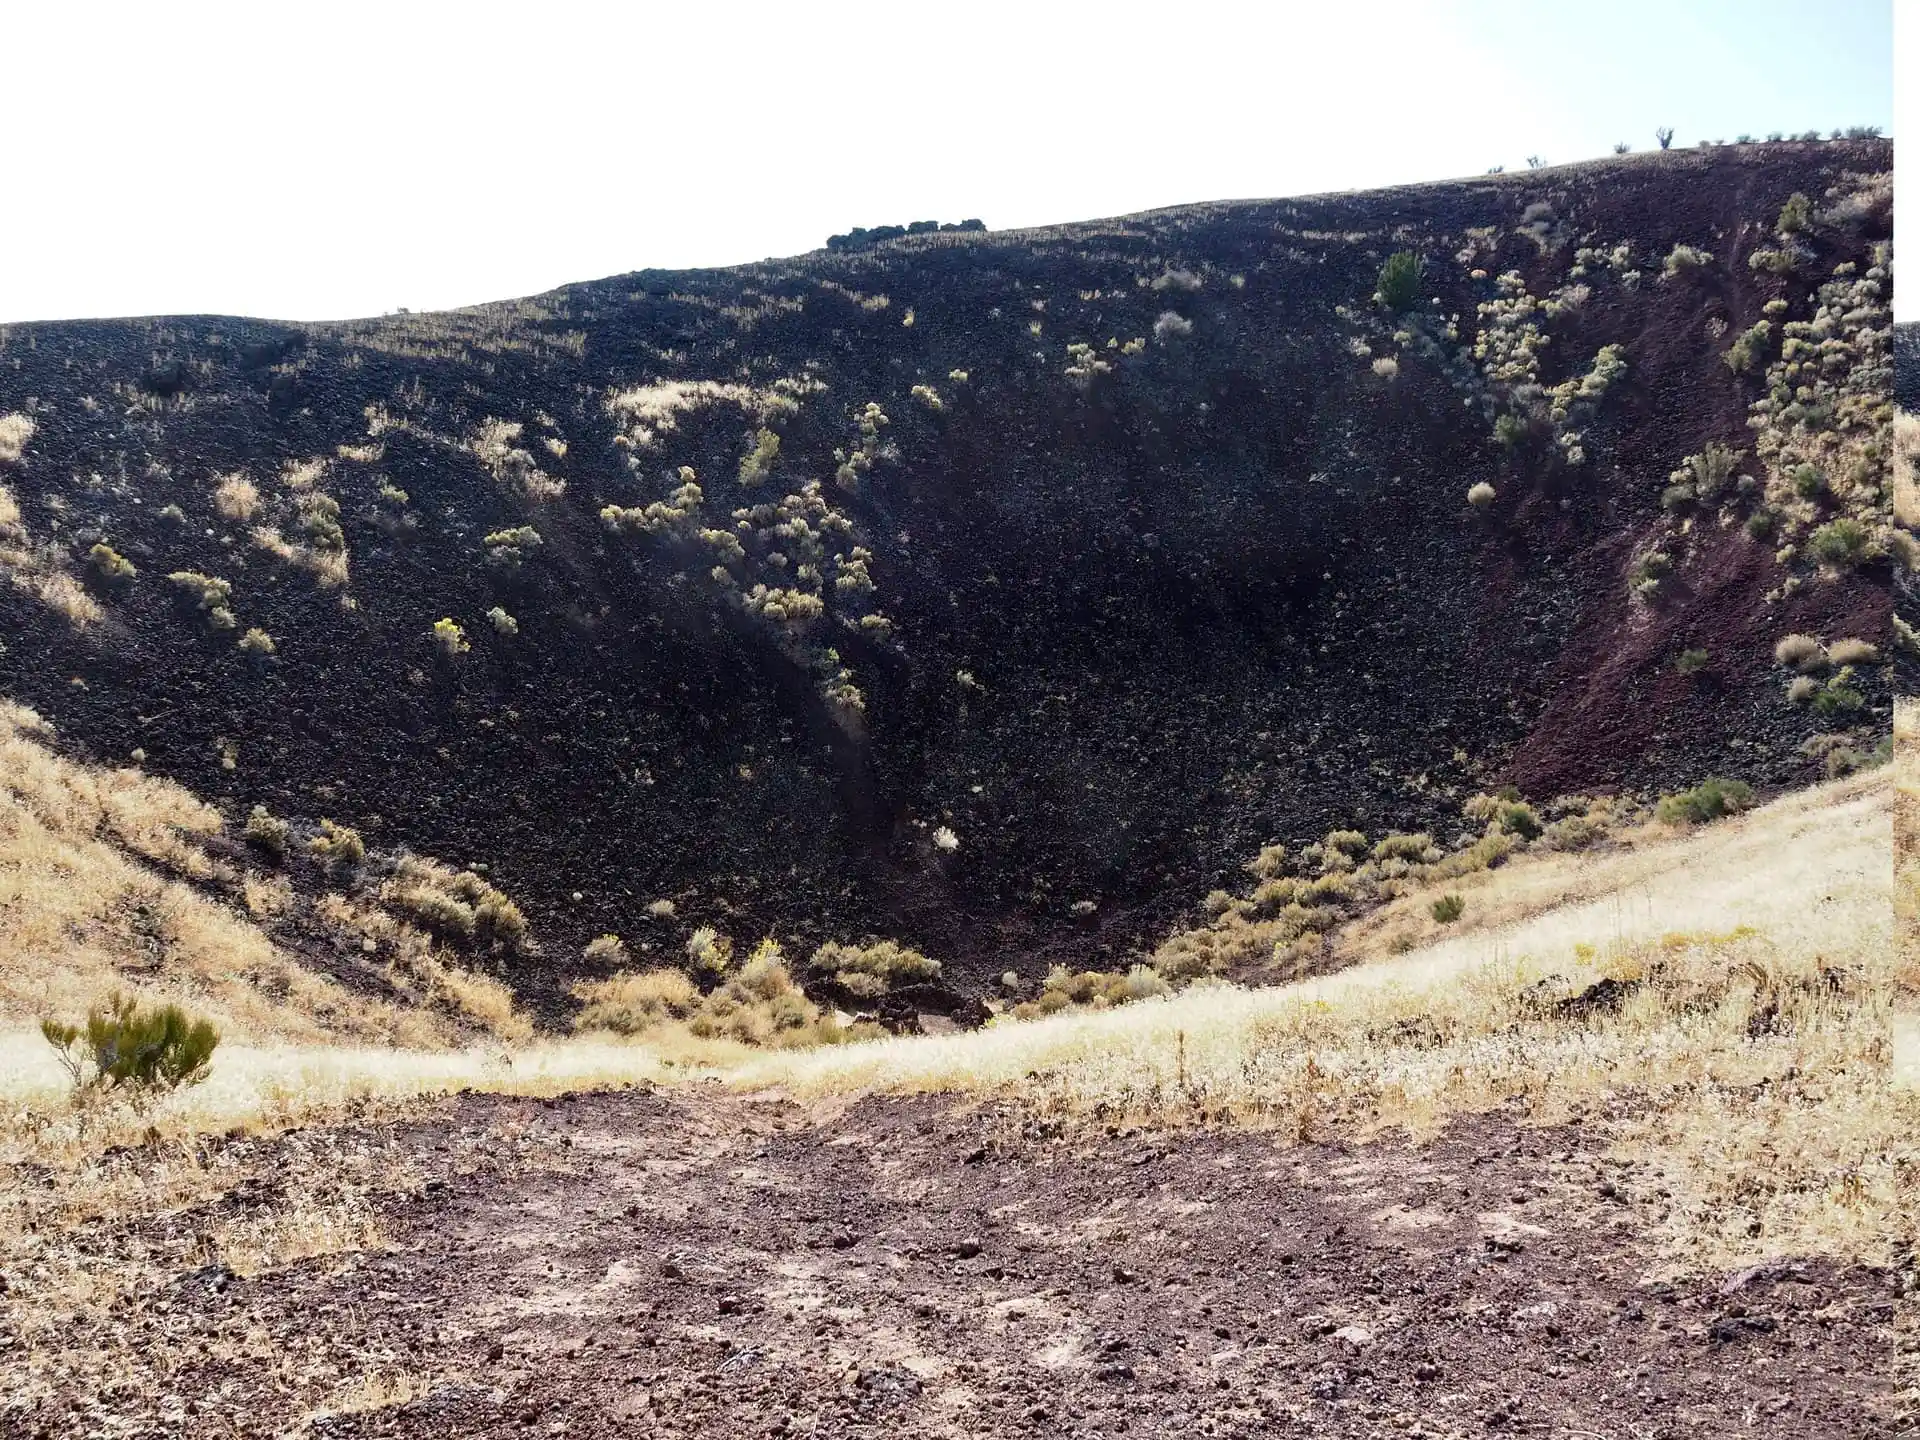 The cinder cone is filled with black lava rock